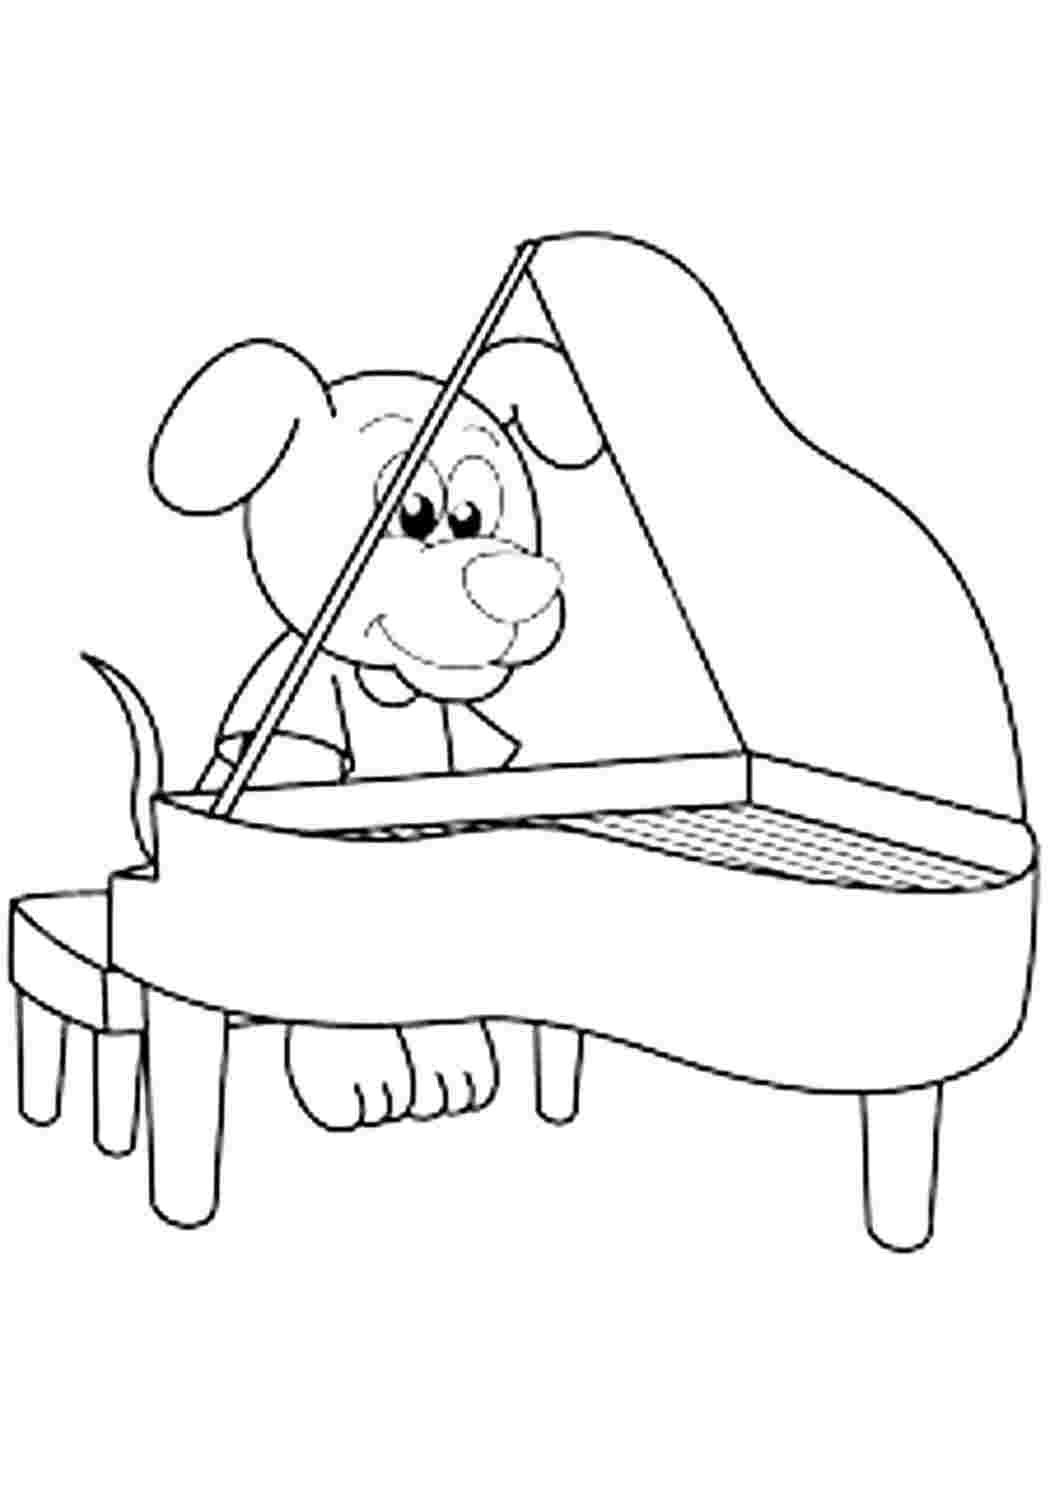 Play the Piano раскраска